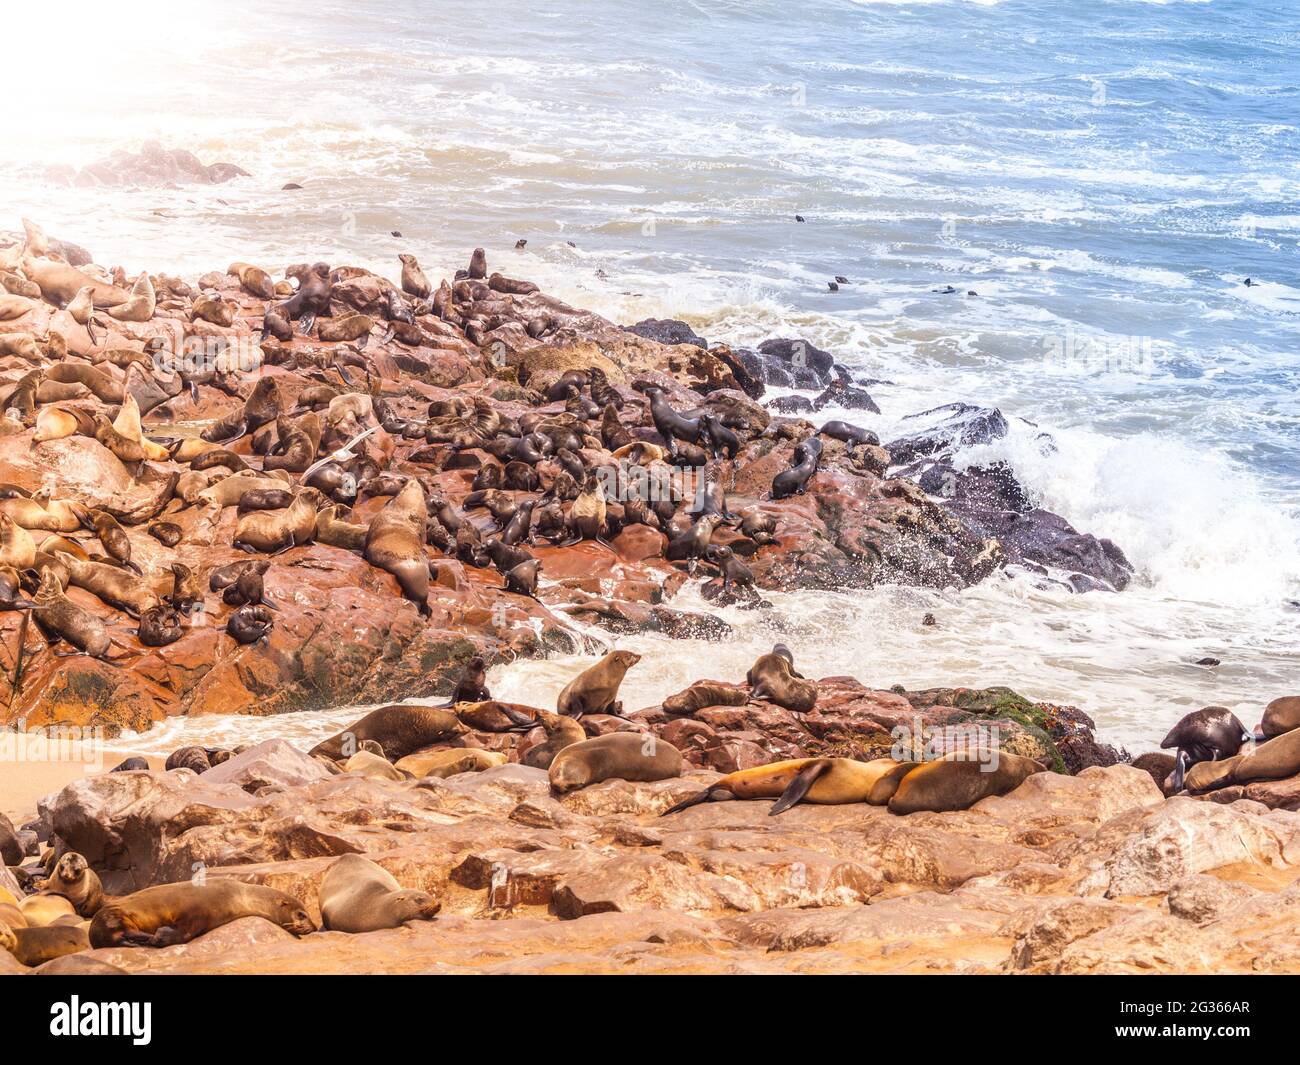 Brown fur seal, Arctocephalus pusillus, colony at Cape Cross in Namibia, Africa Stock Photo